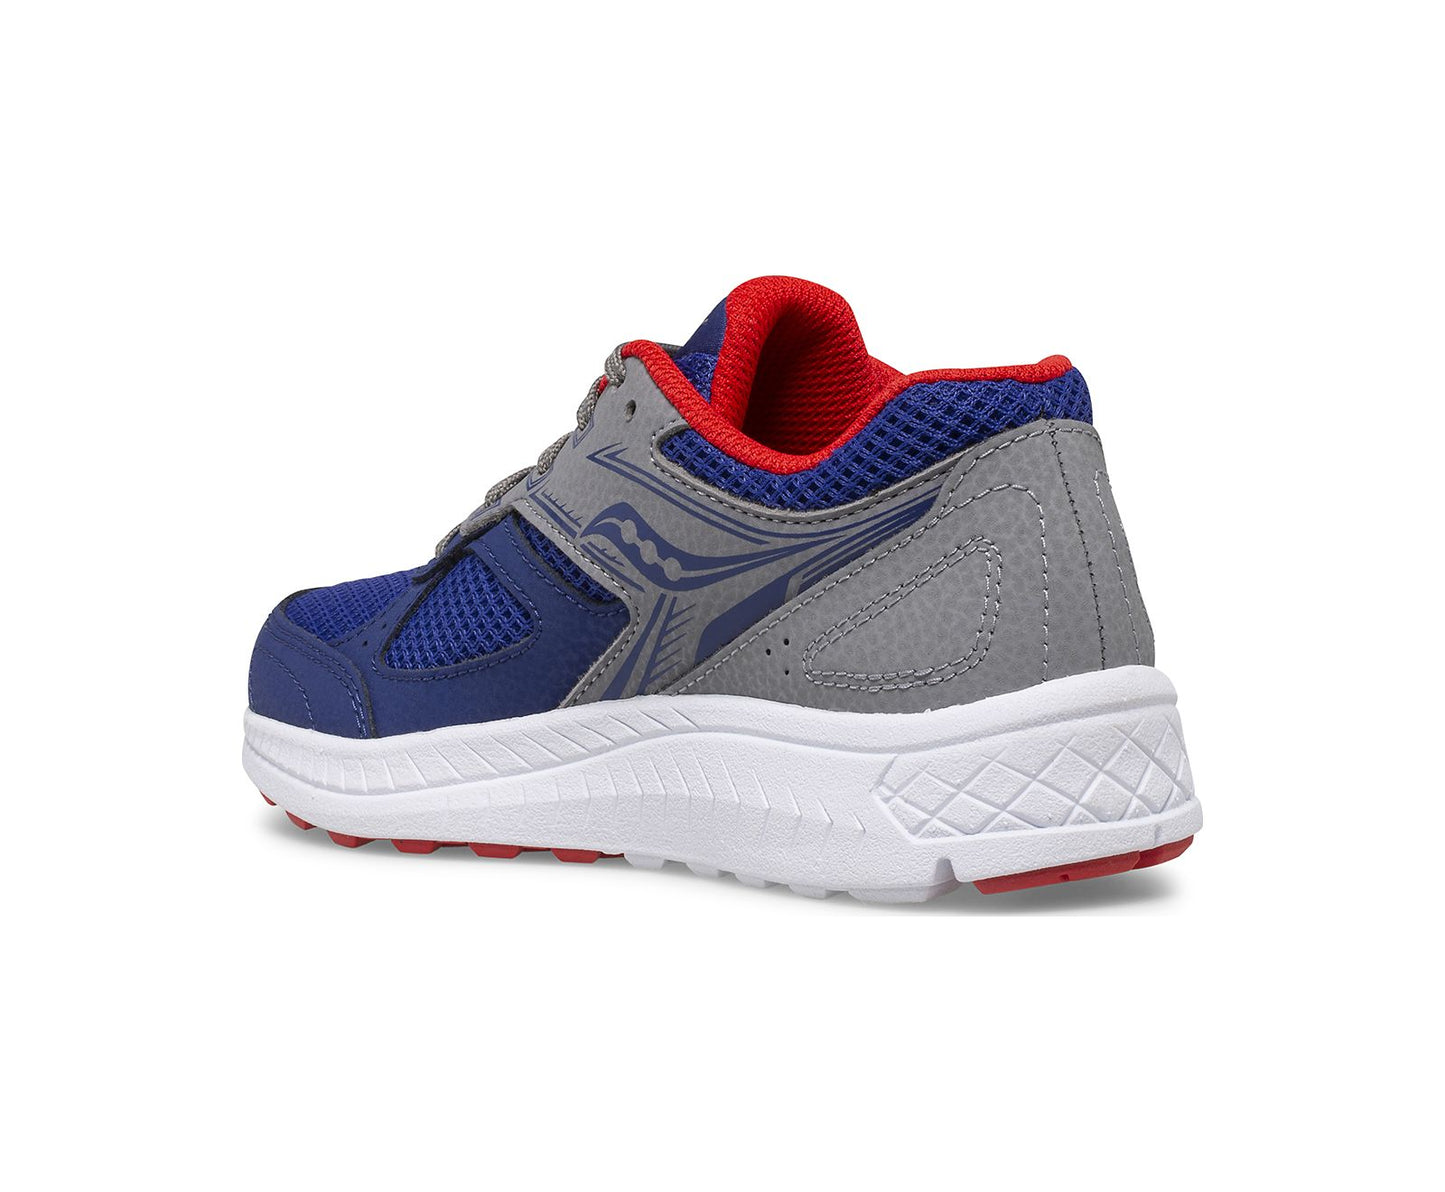 Cohesion 14 Lace Sneaker Navy/Red (1Y-7Y)